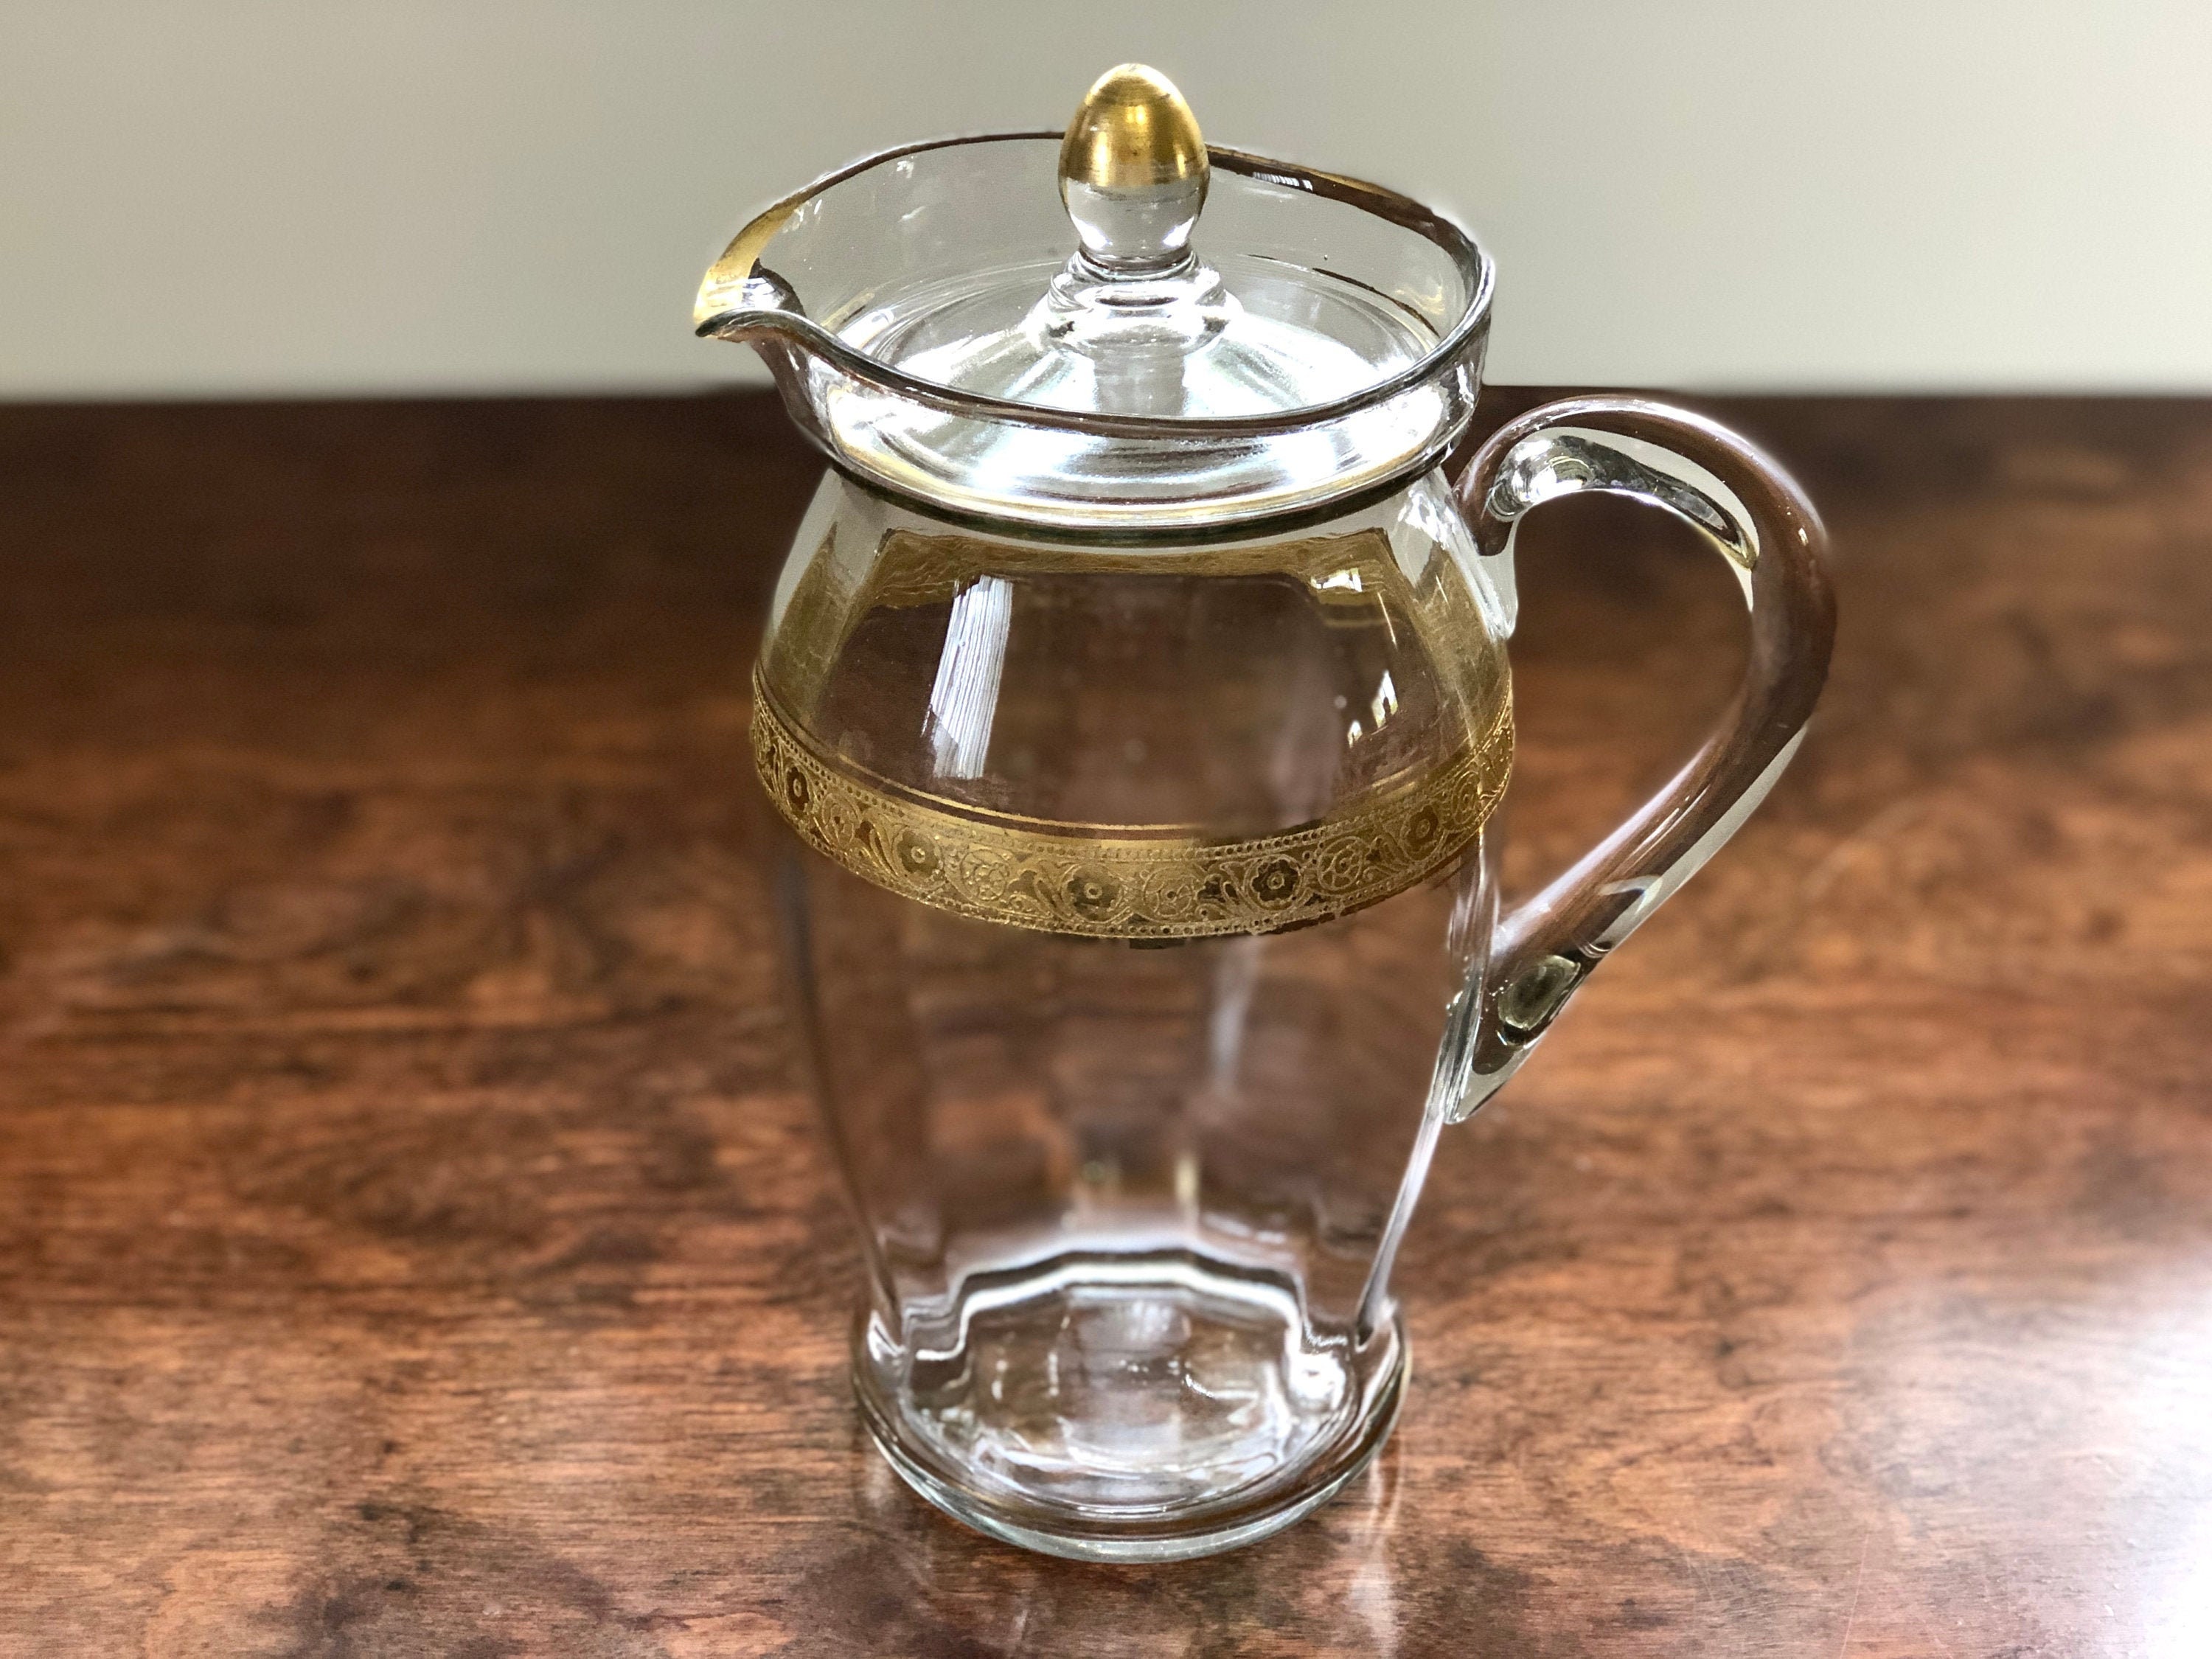 Vintage 1950s Minton Pitcher With Lid by Tiffin Franciscan stem